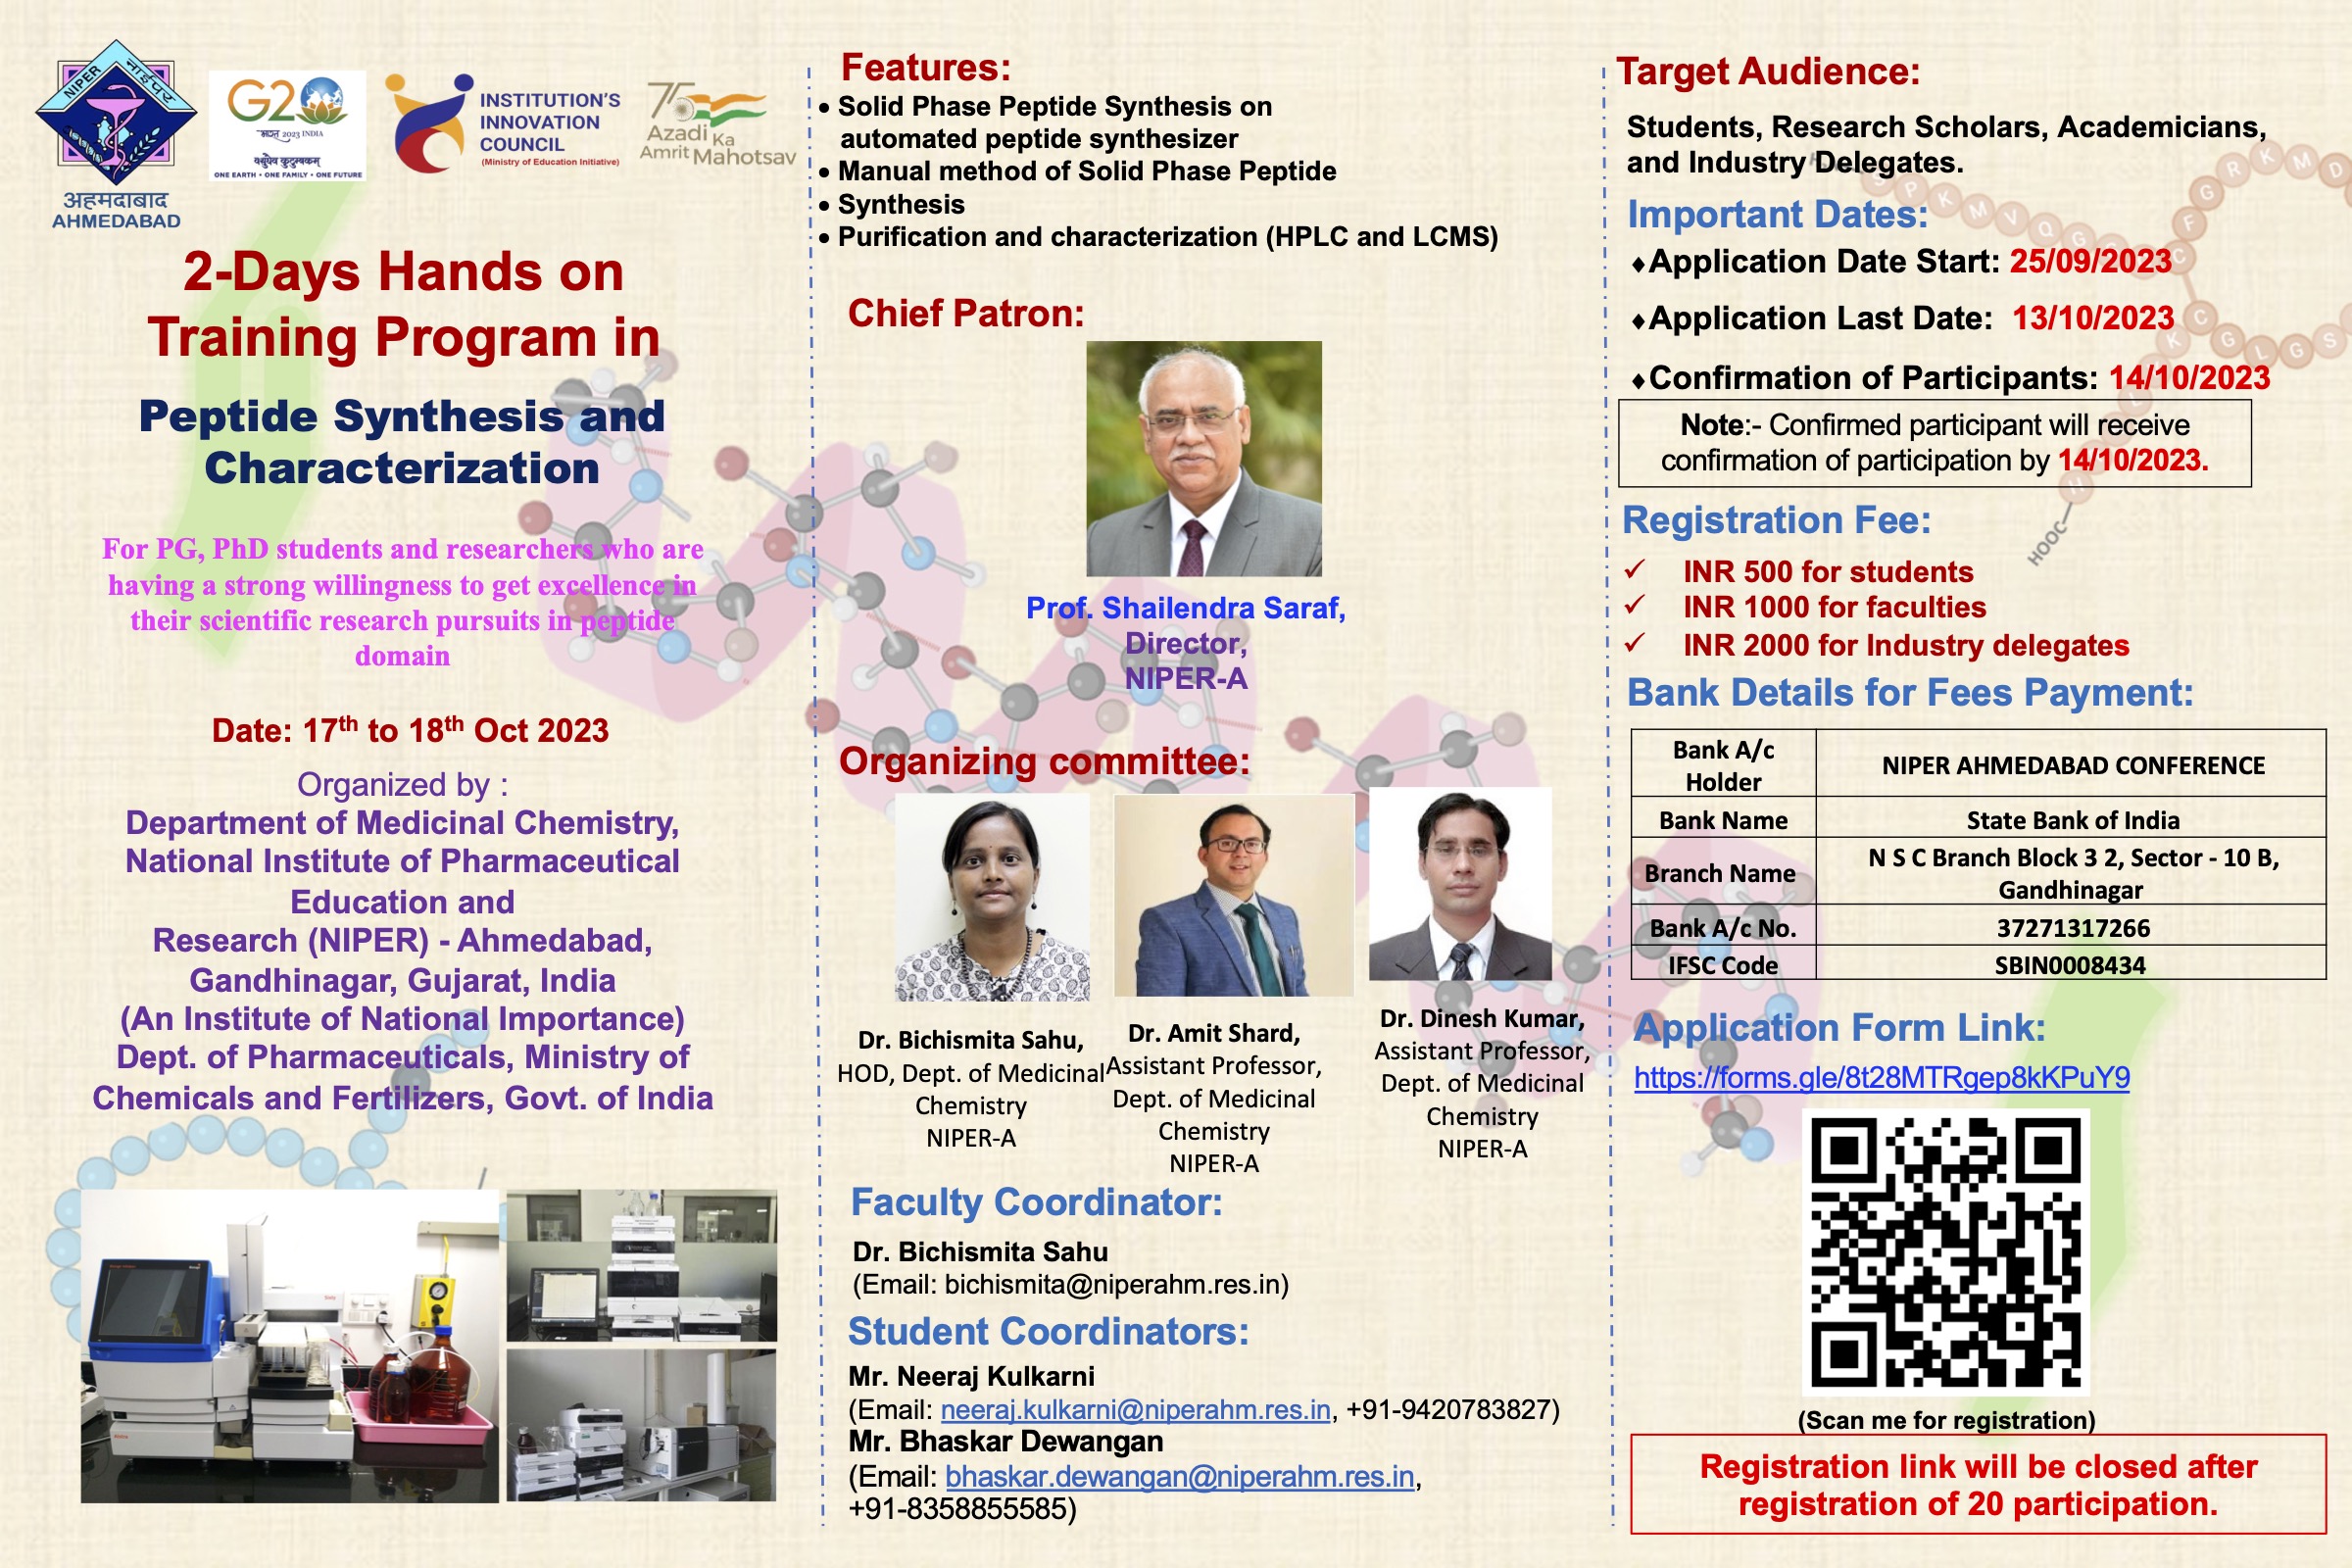 2-Days Hands on Training Program in Peptide Synthesis and Characterization